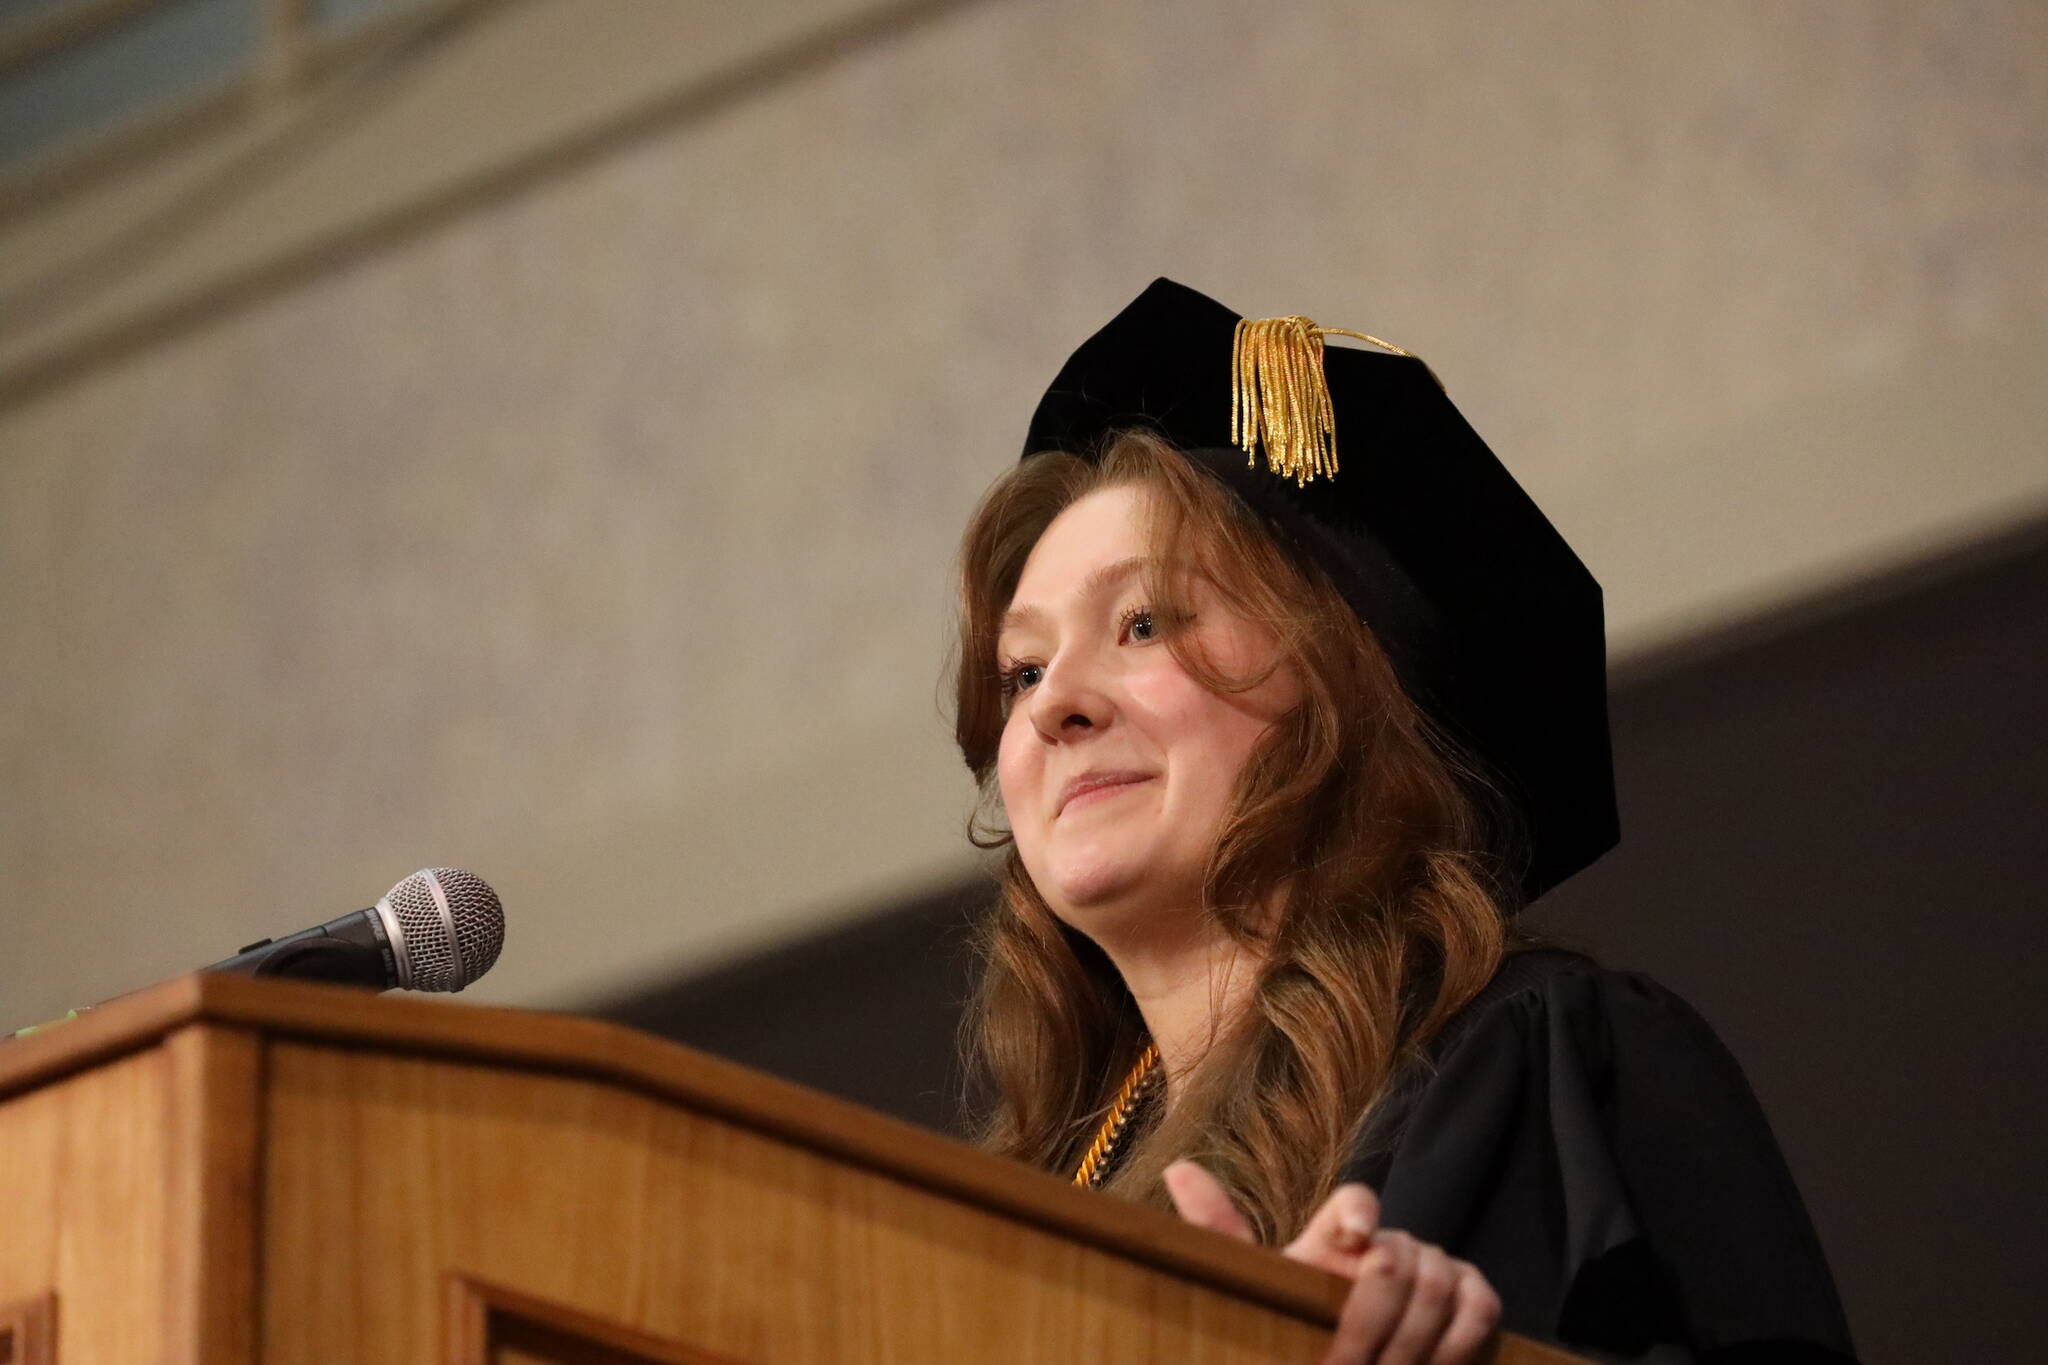 Student speaker Kali Spencer, who received her Bachelor’s of Liberal Arts in Interdisciplinary Studies, shares memories and advice to fellow graduates at the 2023 University of Alaska Southeast commencement ceremony Sunday afternoon. (Clarise Larson / Juneau Empire)